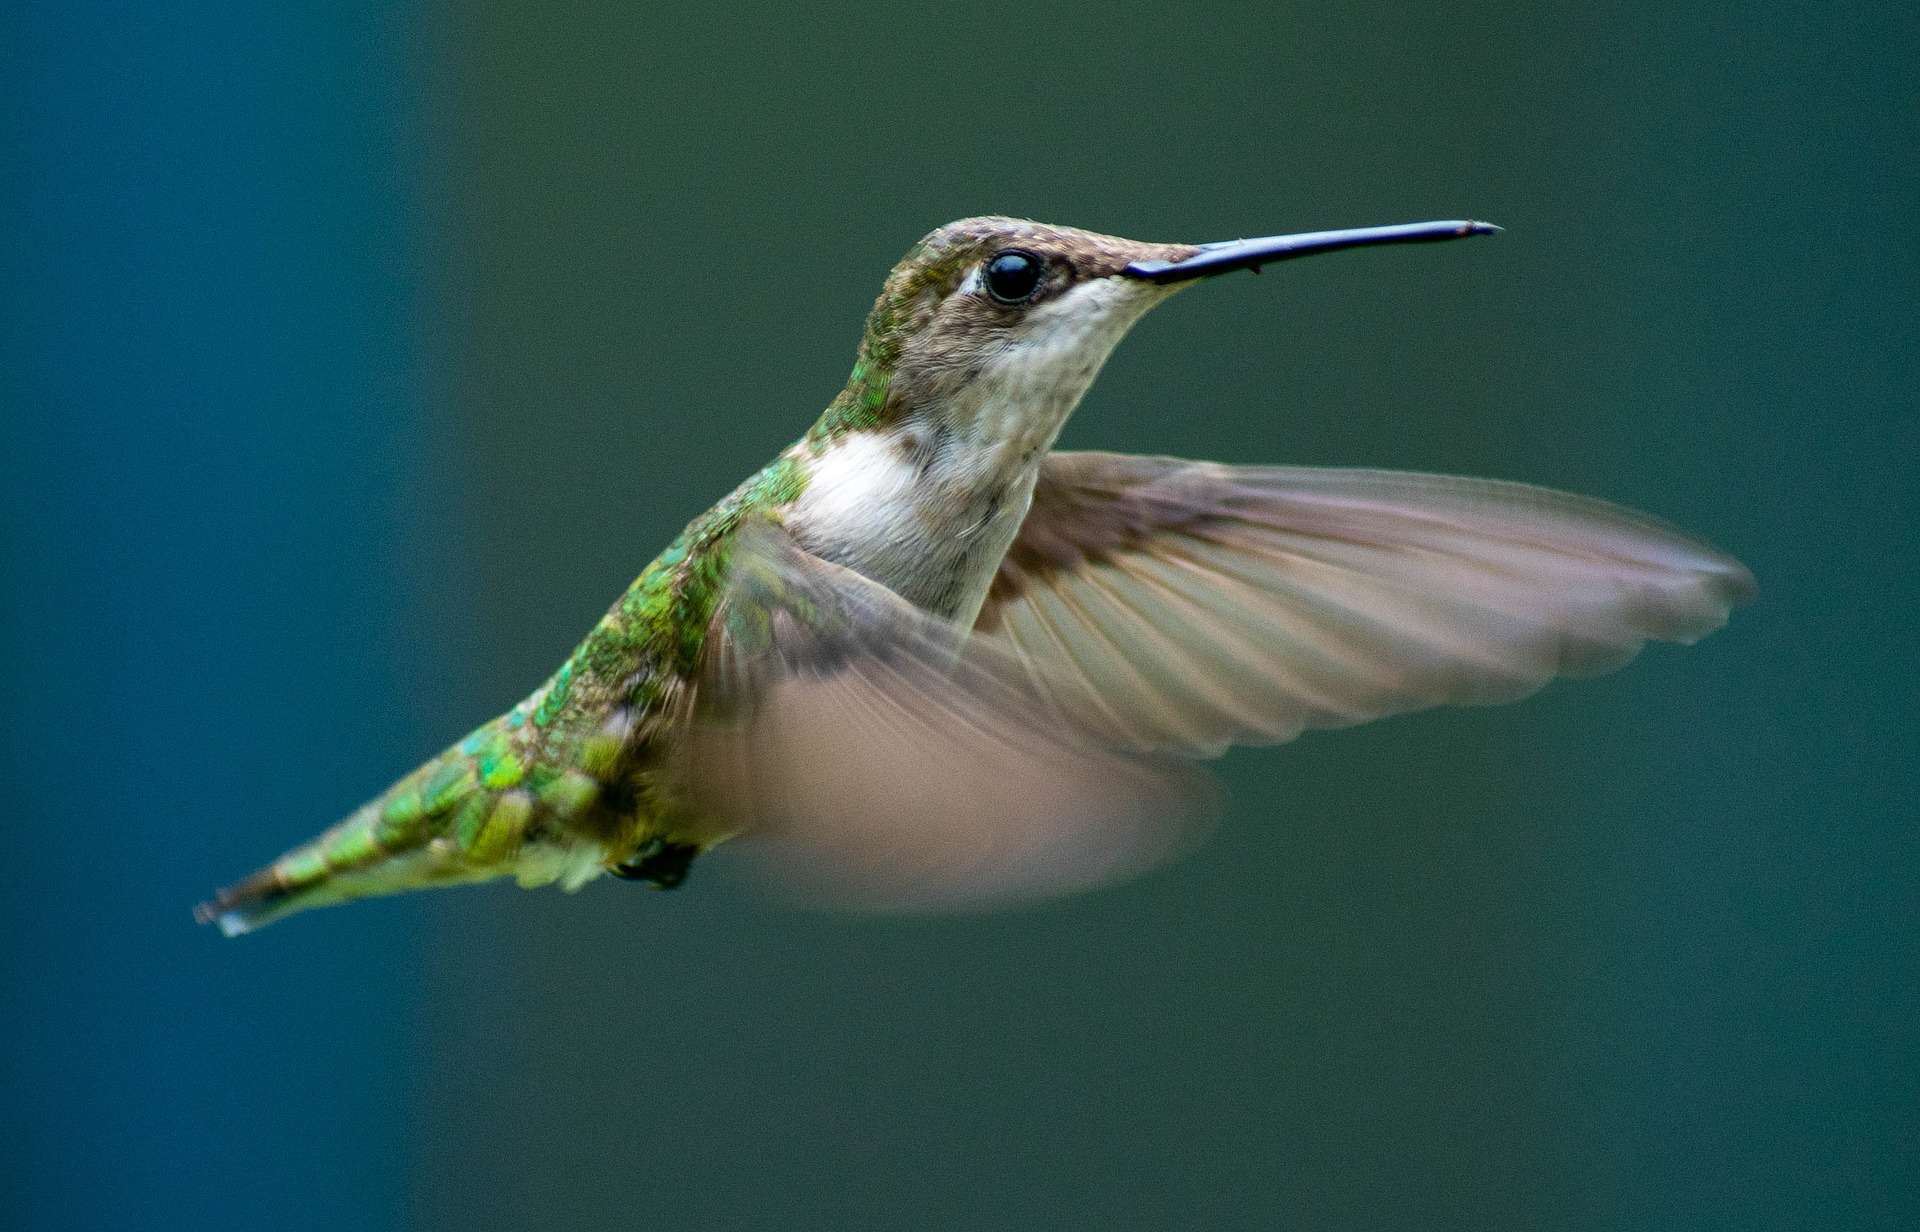 The Surprising Meaning Behind A Daily Visit From A Curious Hummingbird